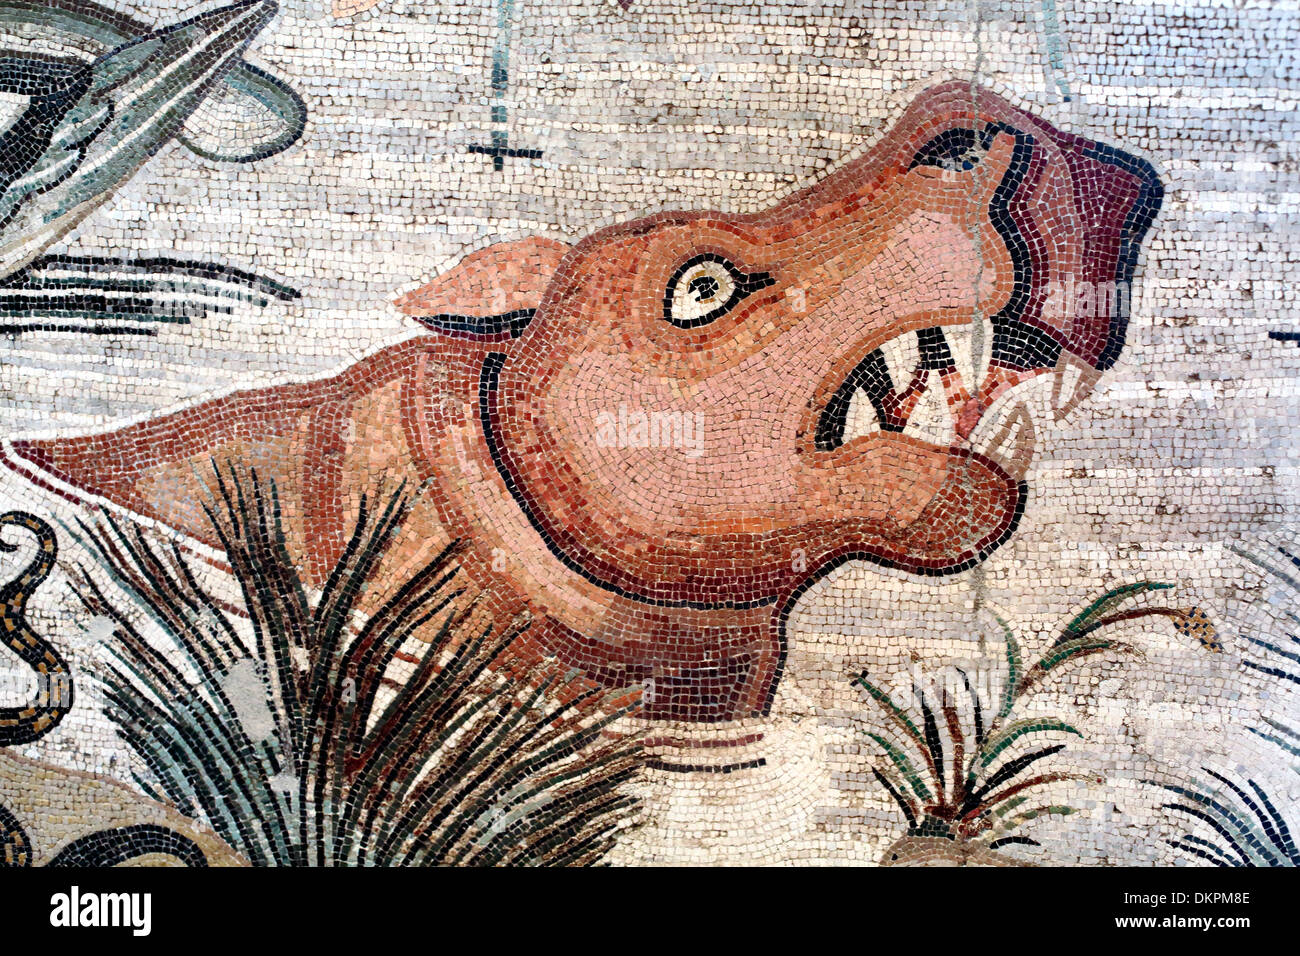 Nile river wildlife scene mosaic, from the House of the Faun, Pompeii (120 BC) Stock Photo